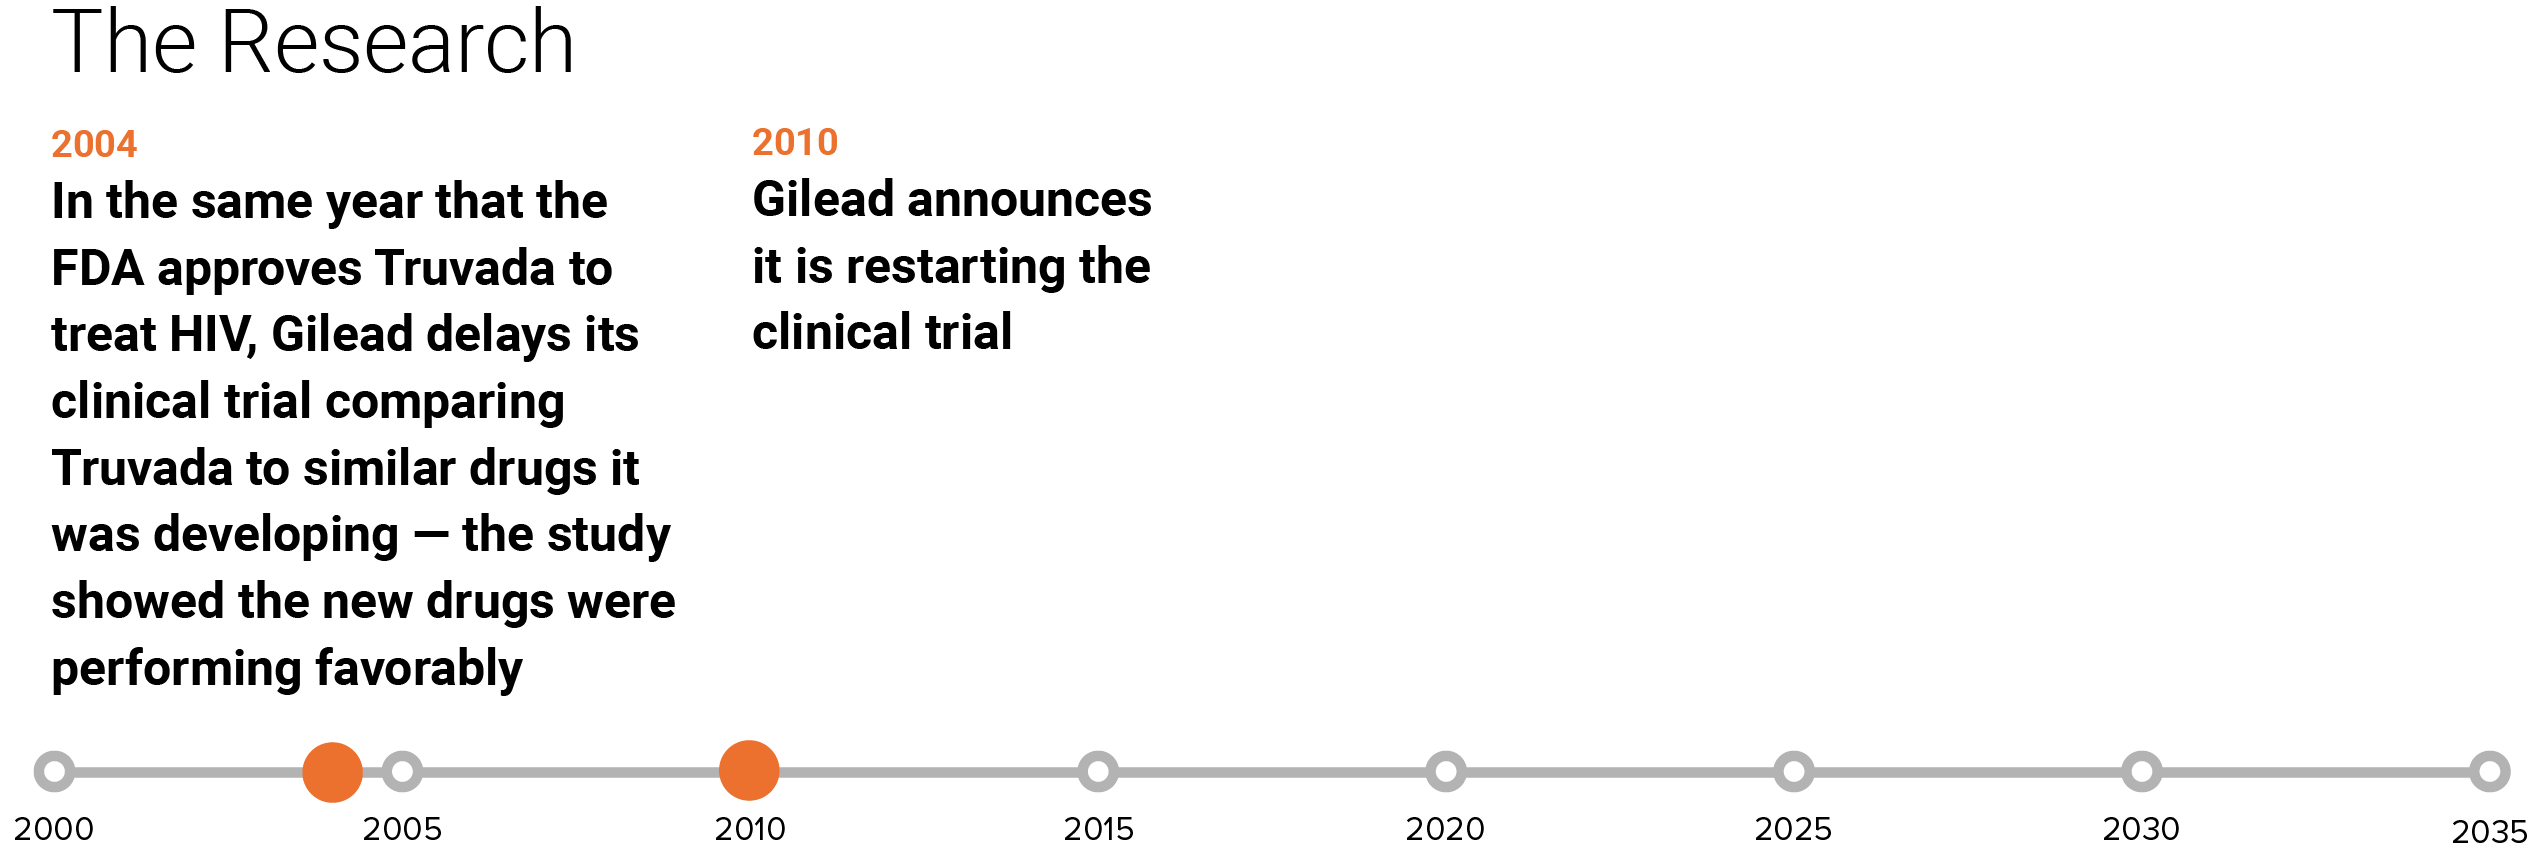 This step of the timeline has the headline: The Research. The timeline has the following items plotted with blue dots between 2000 and 2035. 2004, In the same year that the FDA approves Truvada to treat HIV, Gilead delays its clinical trial comparing Truvada to similar drugs it was developing - the study showed the new drugs were performing favorably. 2010, Gilean announces it is restarting the clinical trial.